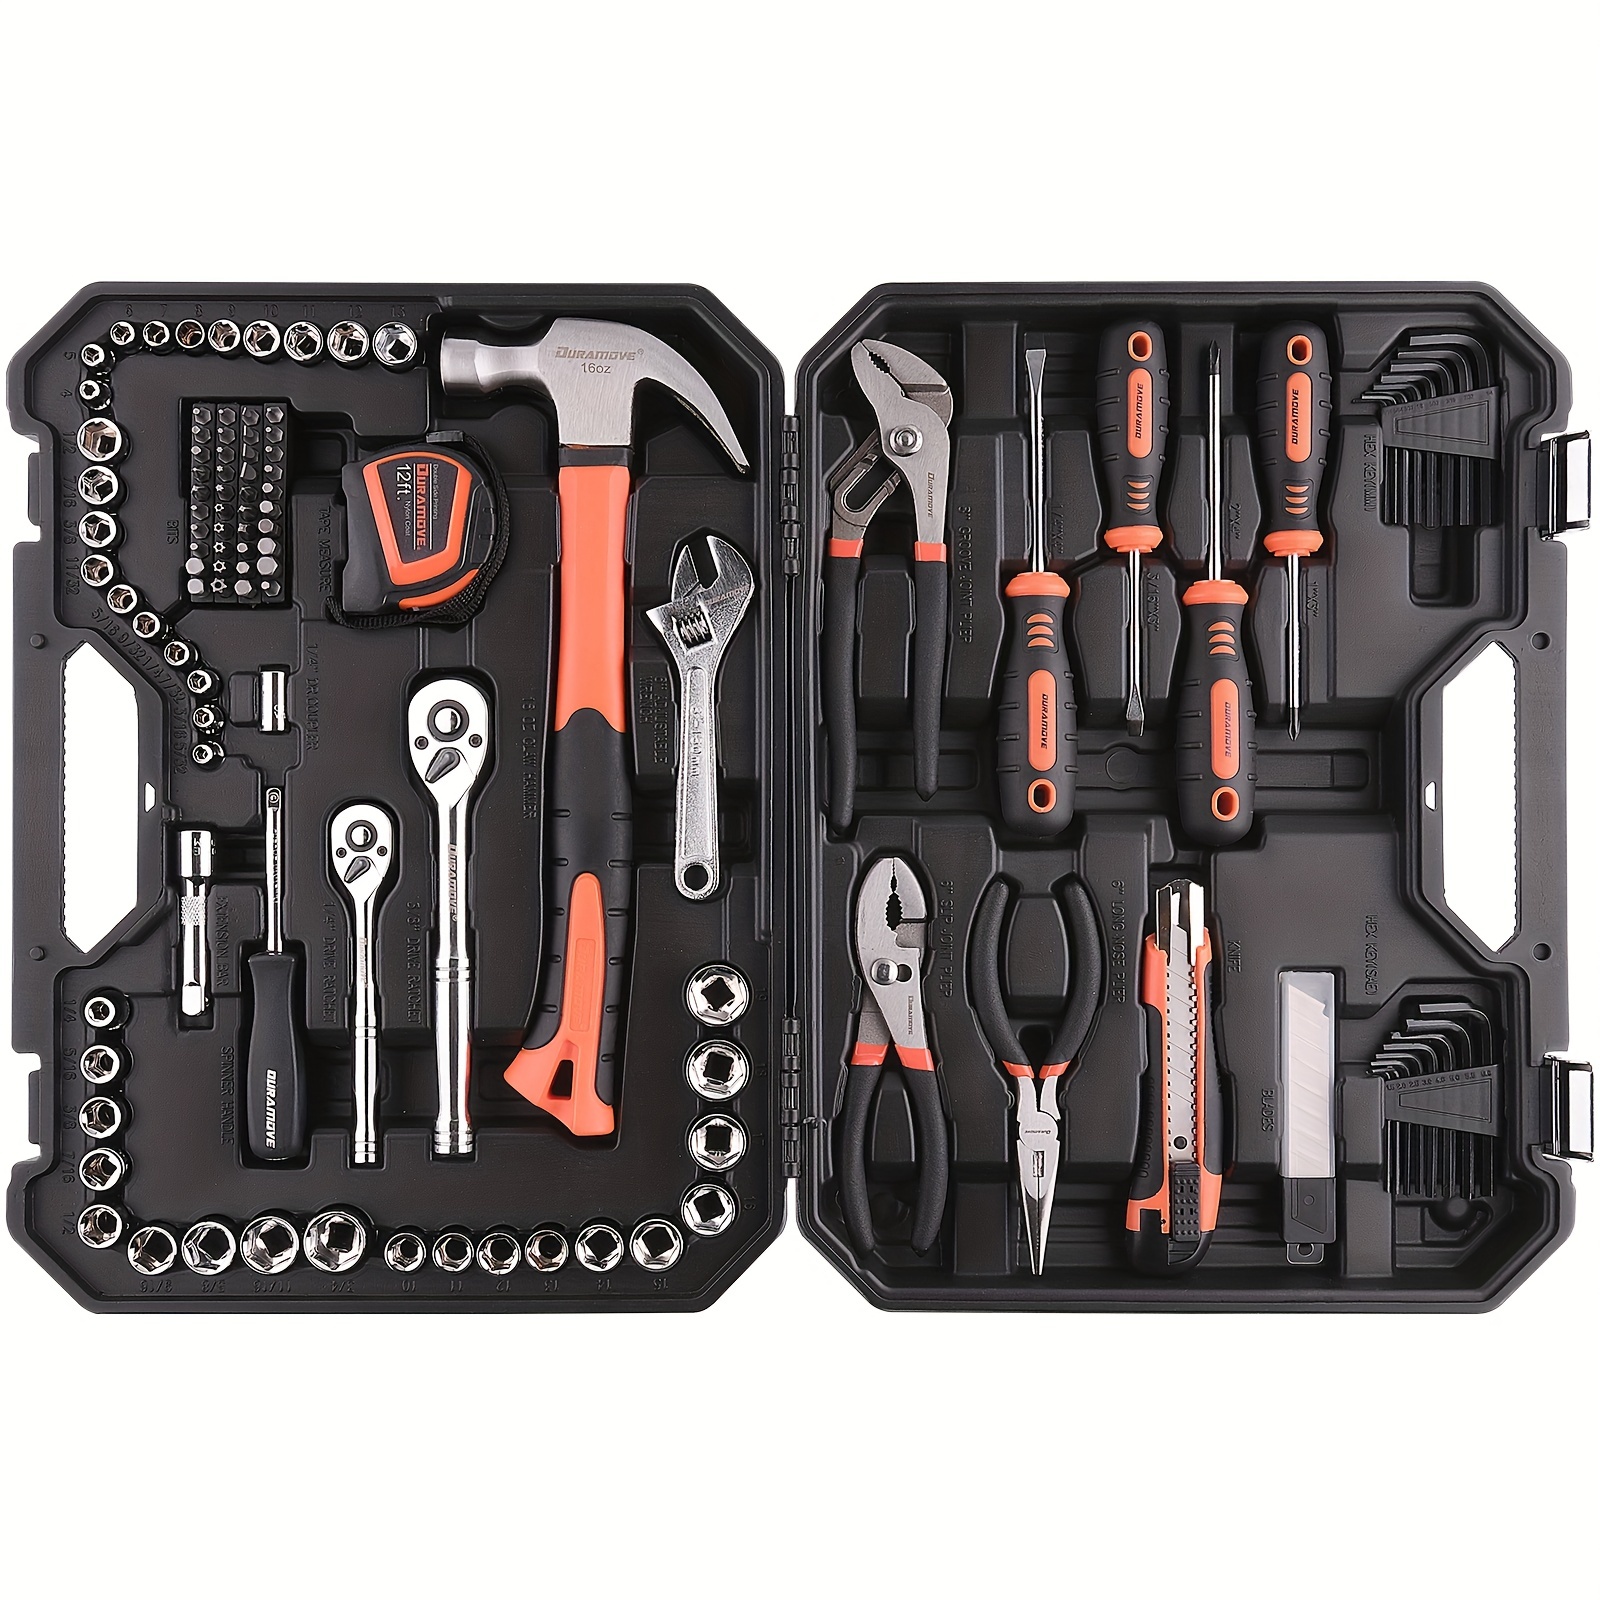 DURAMOVE Household Tool Kit for Homeowner, 58 Piece Home/Auto Repair Hand Tool Set with Tool Box, Mixed Tool Set for man,women,father,handyman